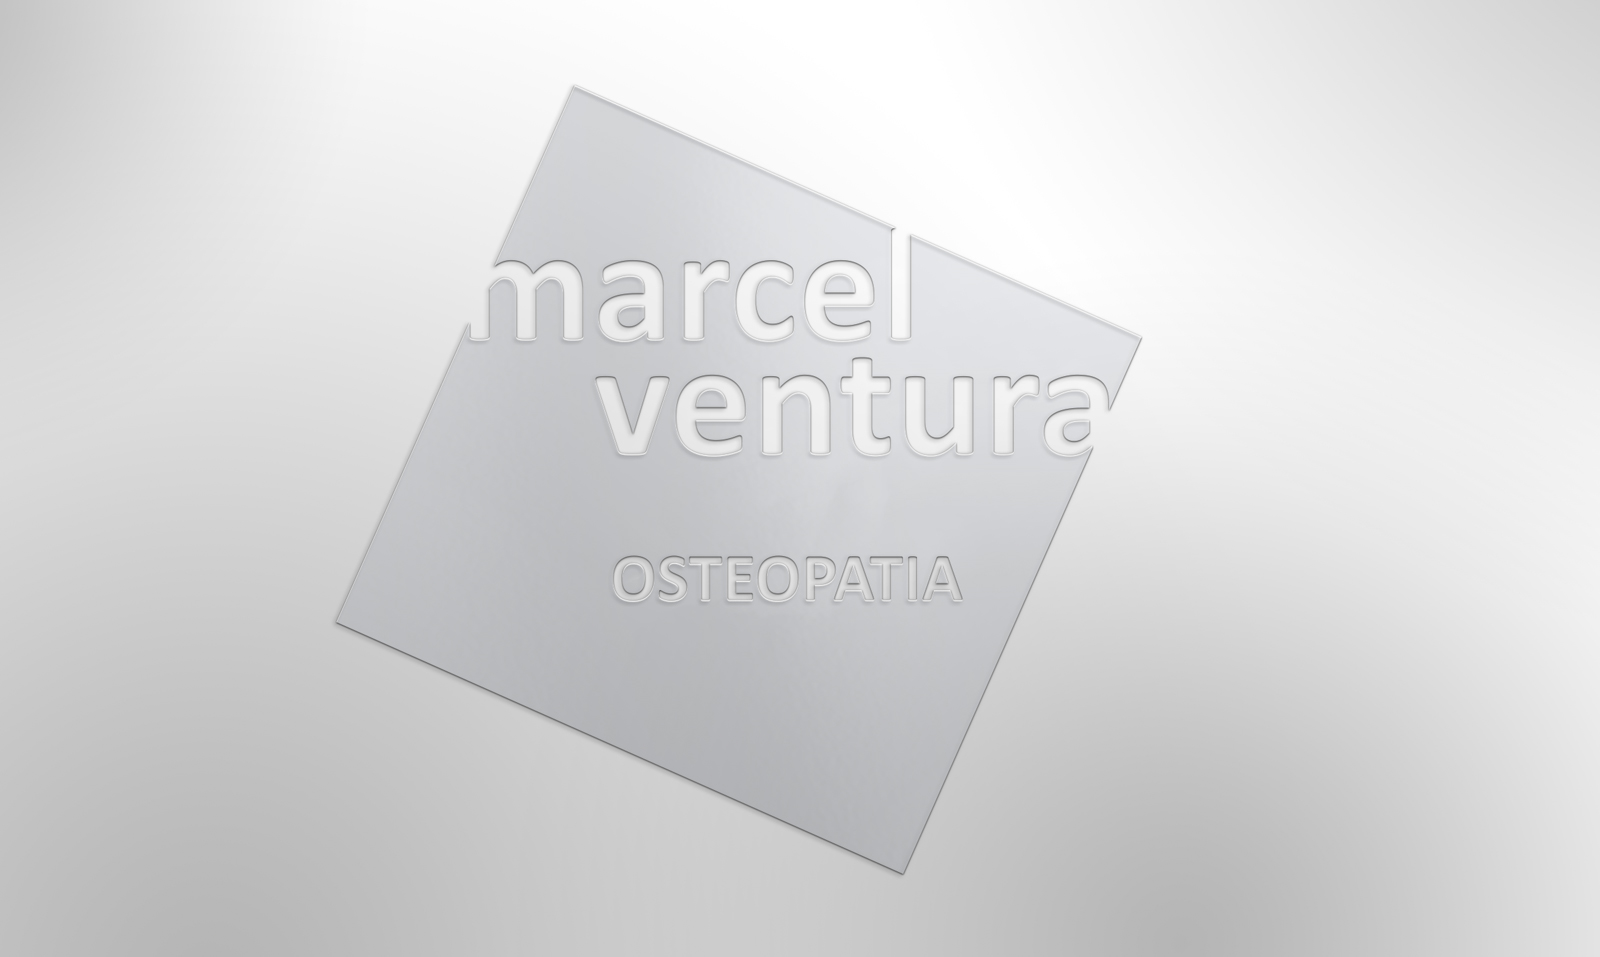 Portfolio of logo and brand design work for medical center specializing in osteopathy